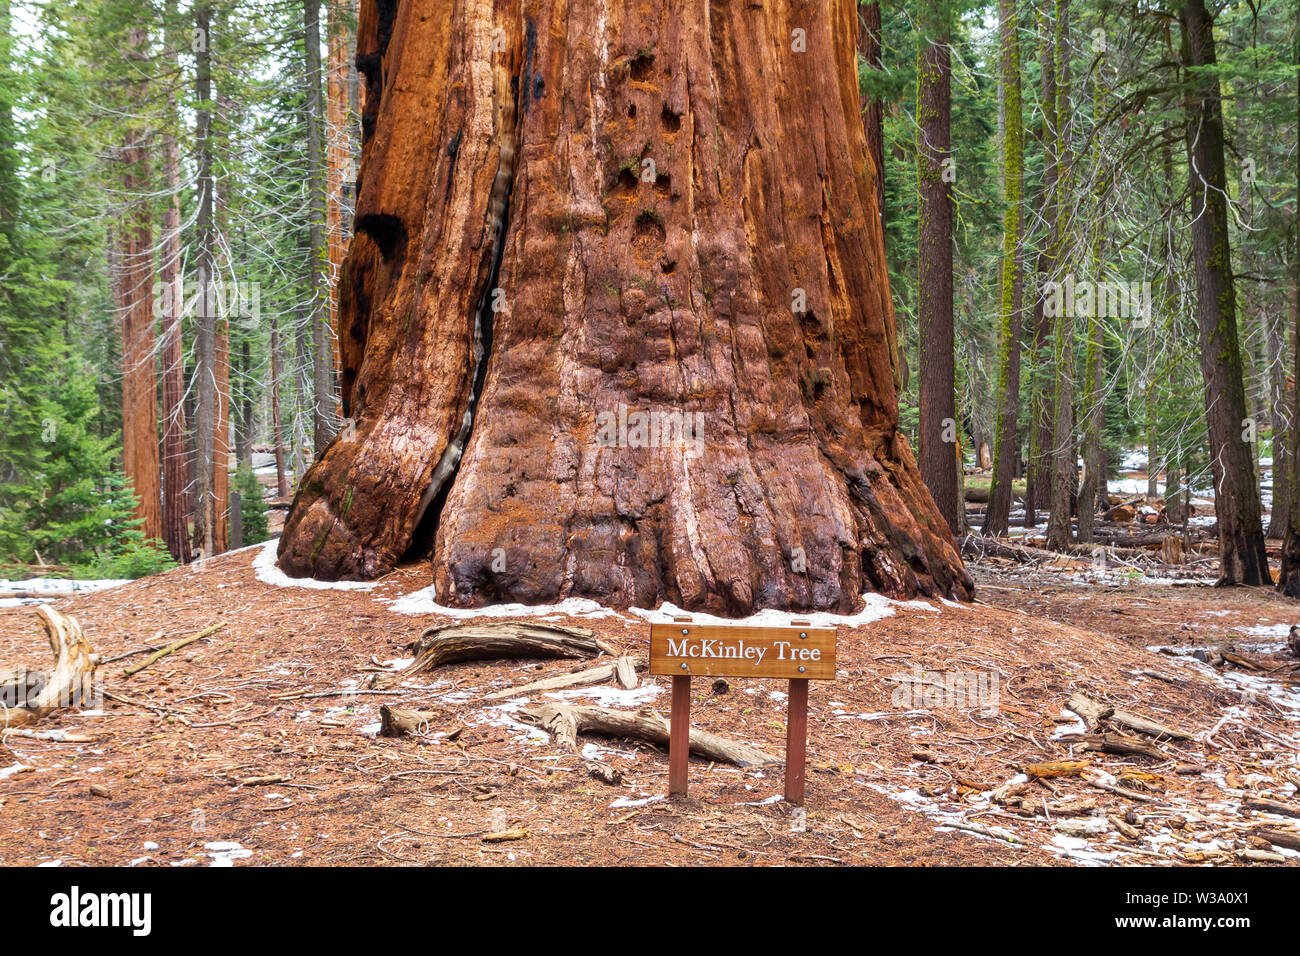 McKinley tree, a giant sequoia at Sequoia National Park, United States Stock Photo